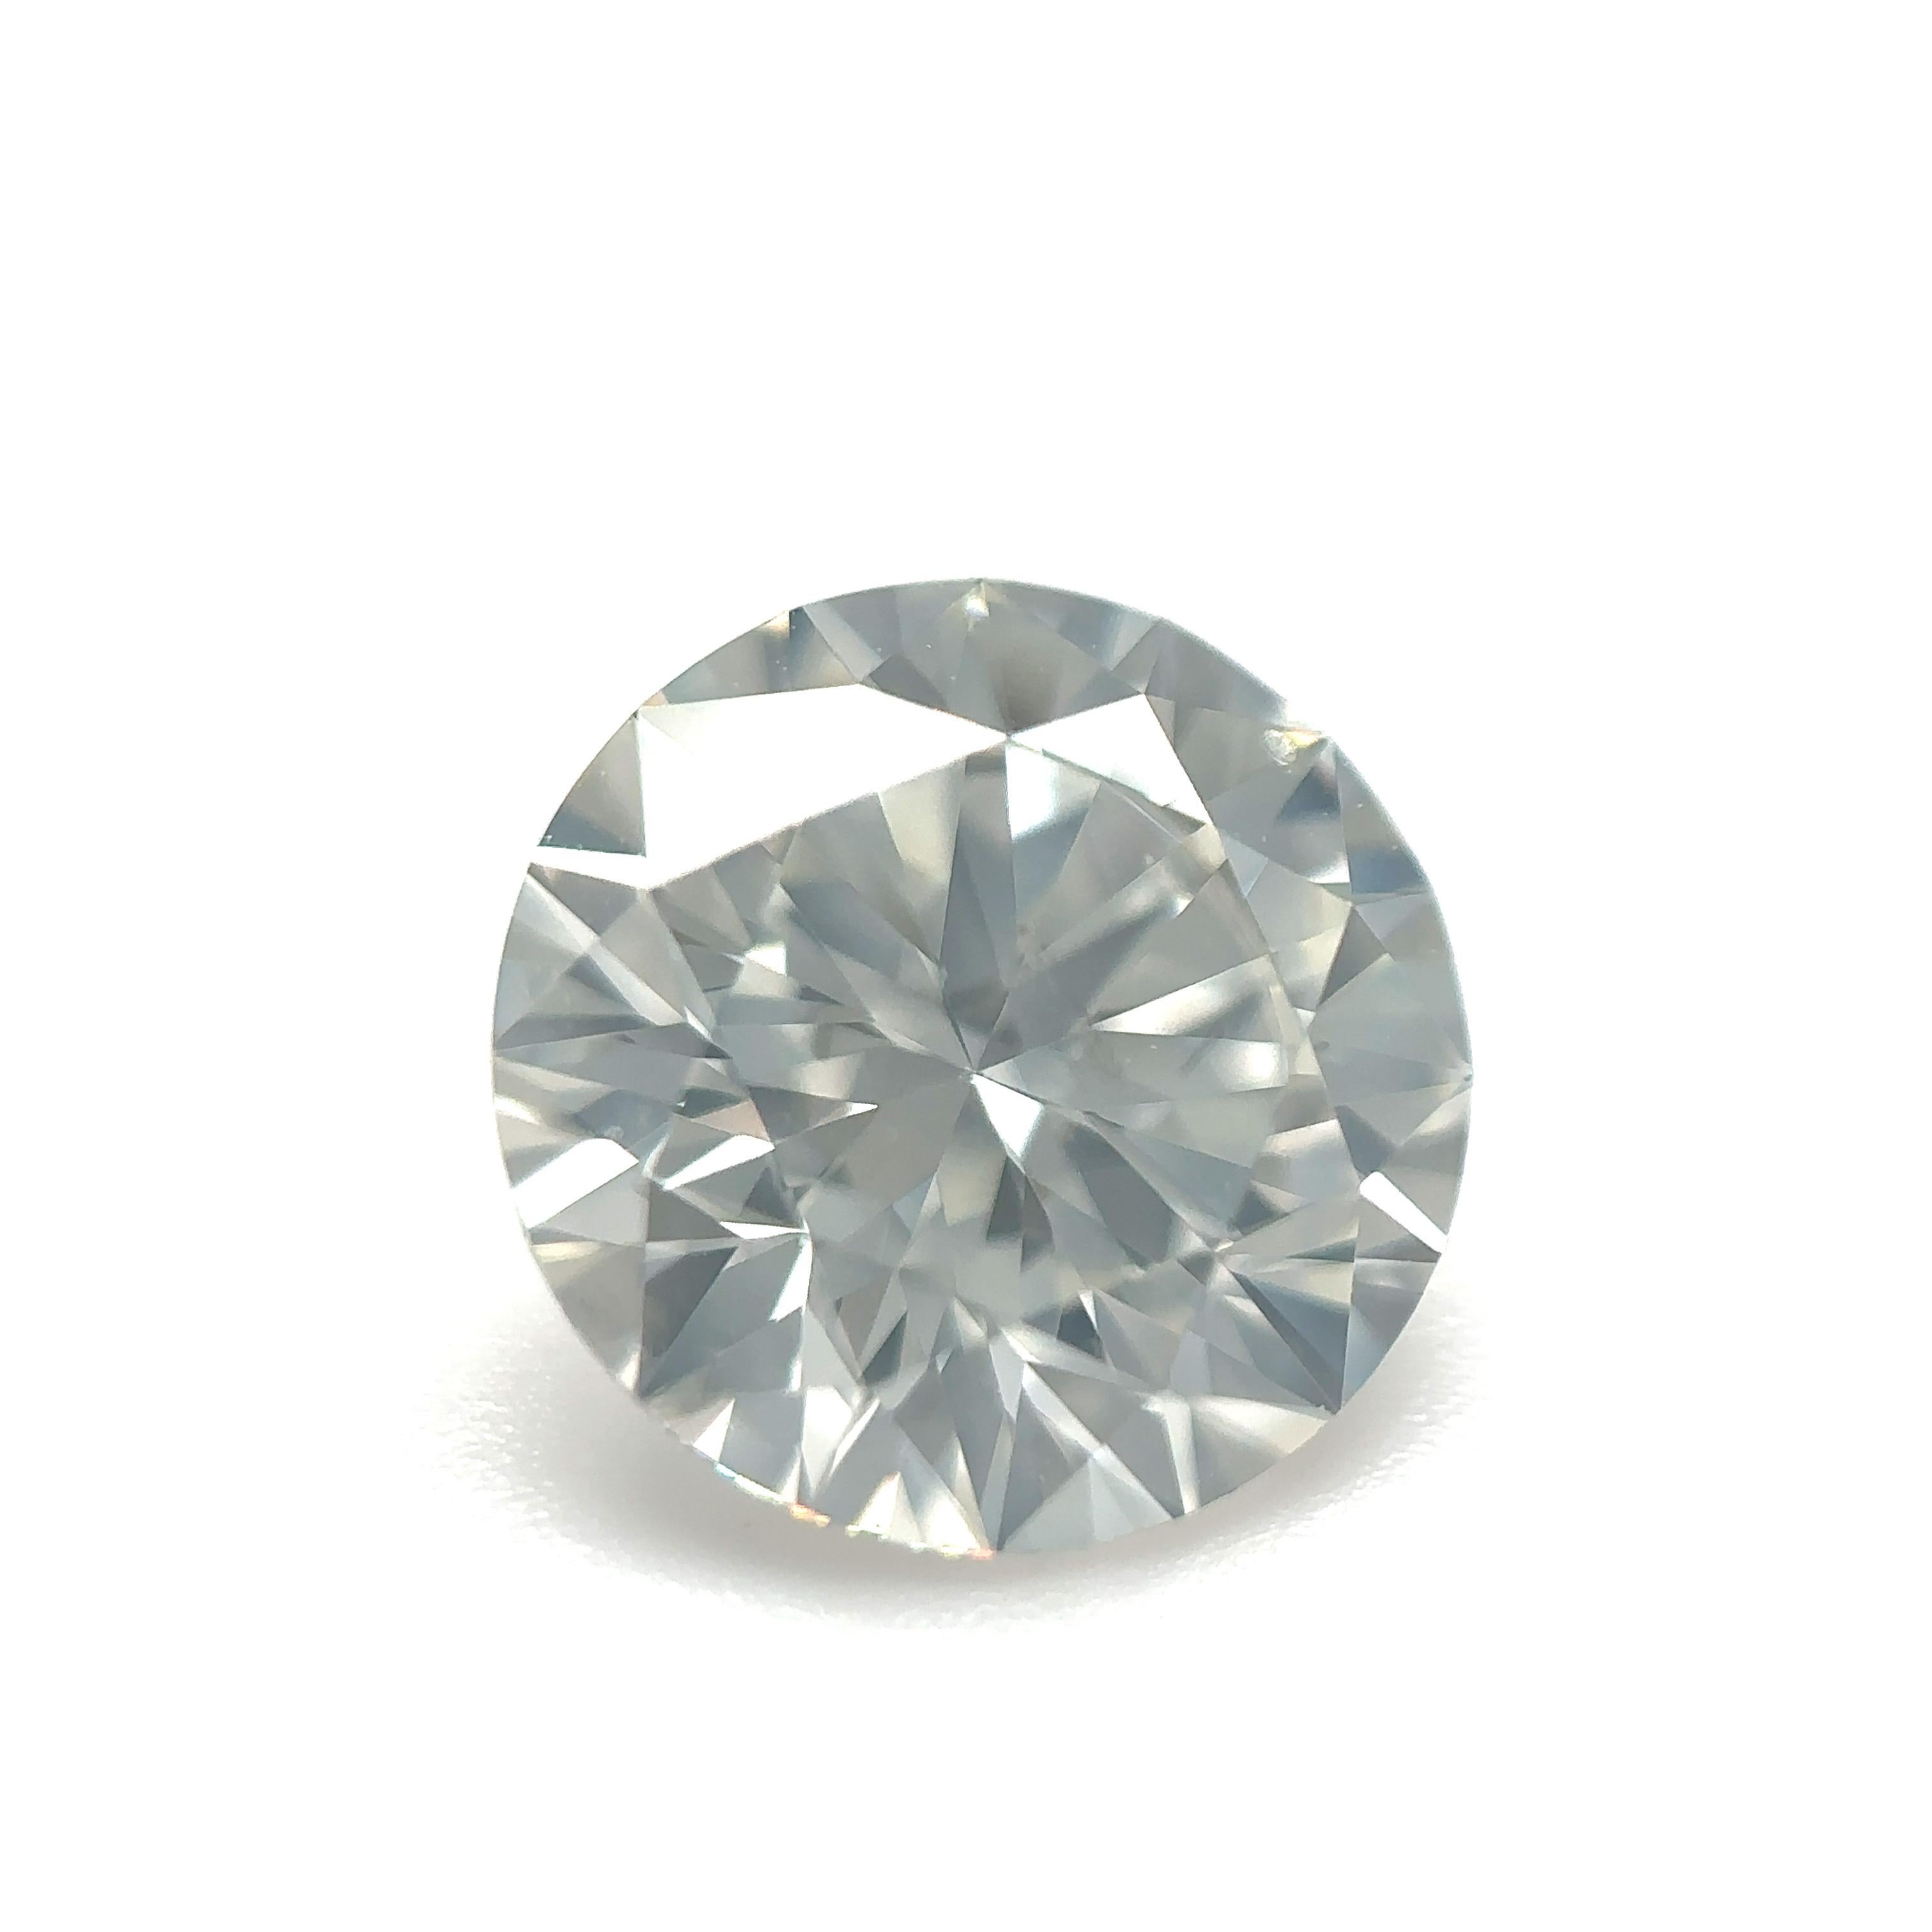 GIA Certified 1.78 Carat Round Brilliant Diamond Loose Stone (Customization Option)

Color: J
Clarity: SI1 

Ideal for engagement rings, wedding bands, diamond necklaces and diamond earrings. Get in touch with us to customise your jewellery! 

ABOUT